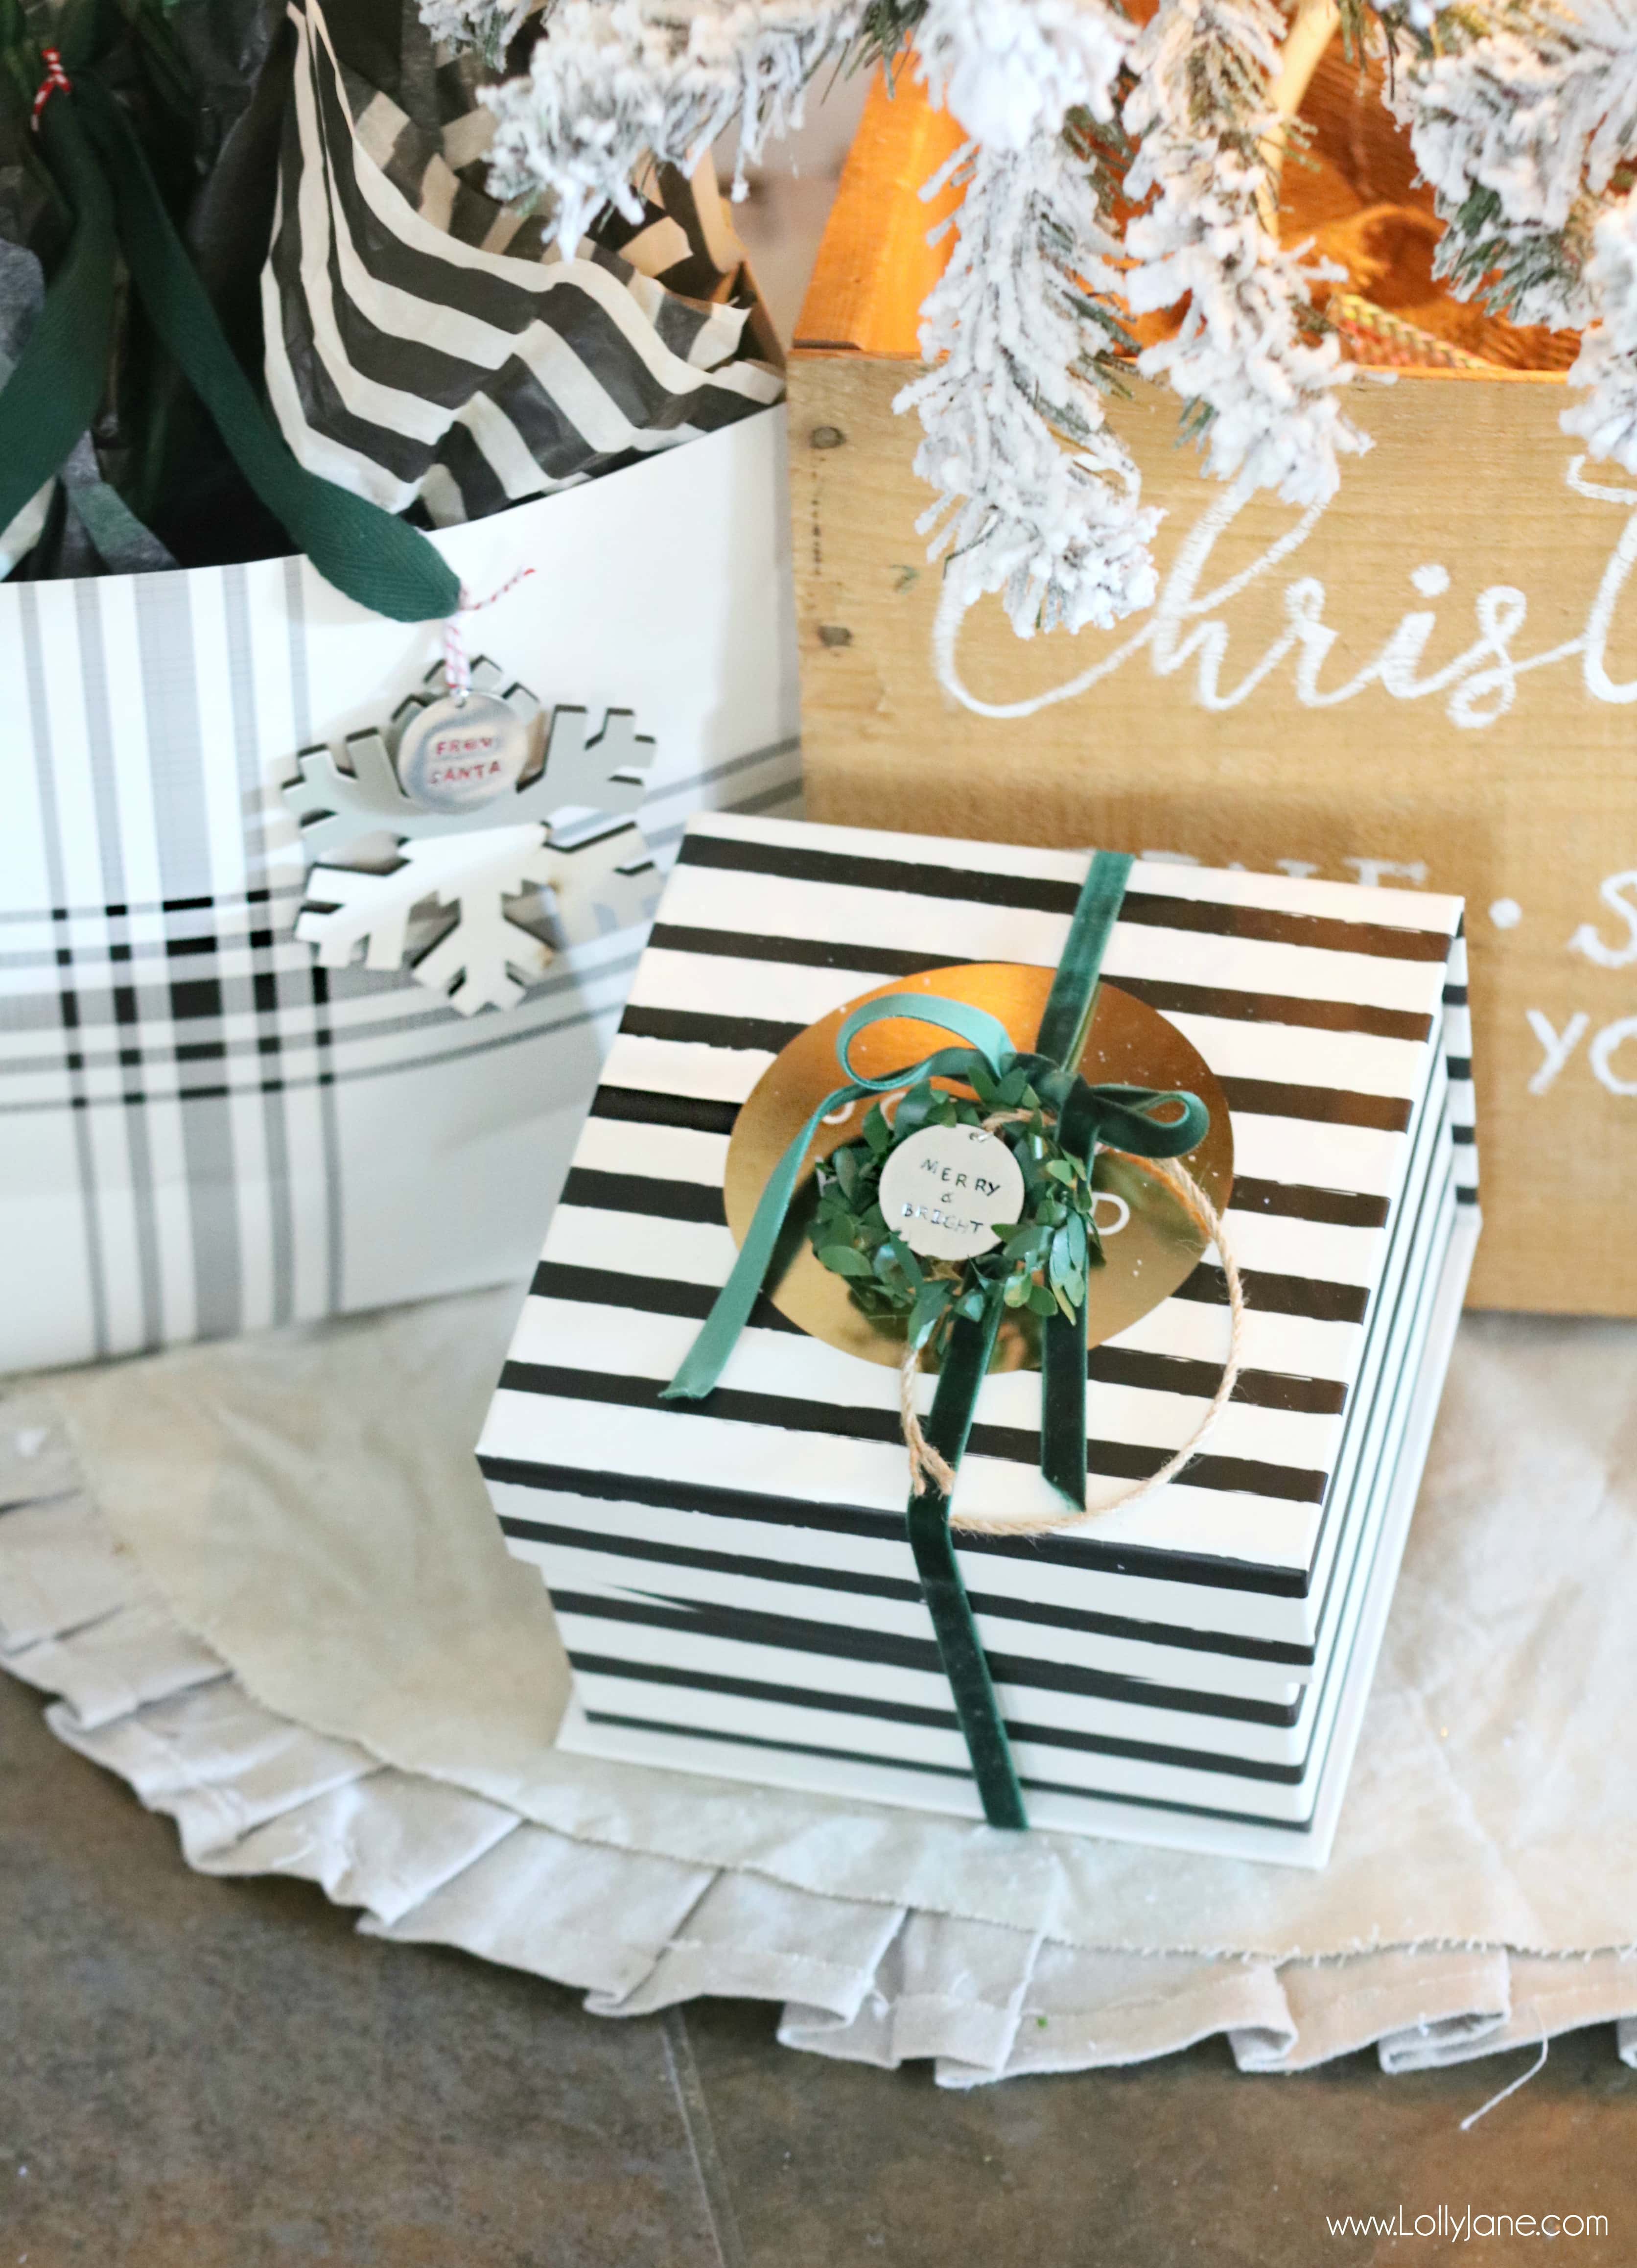 Easy DIY to stamp your own metal charms, so cute and perfect to personalize holiday gifts!